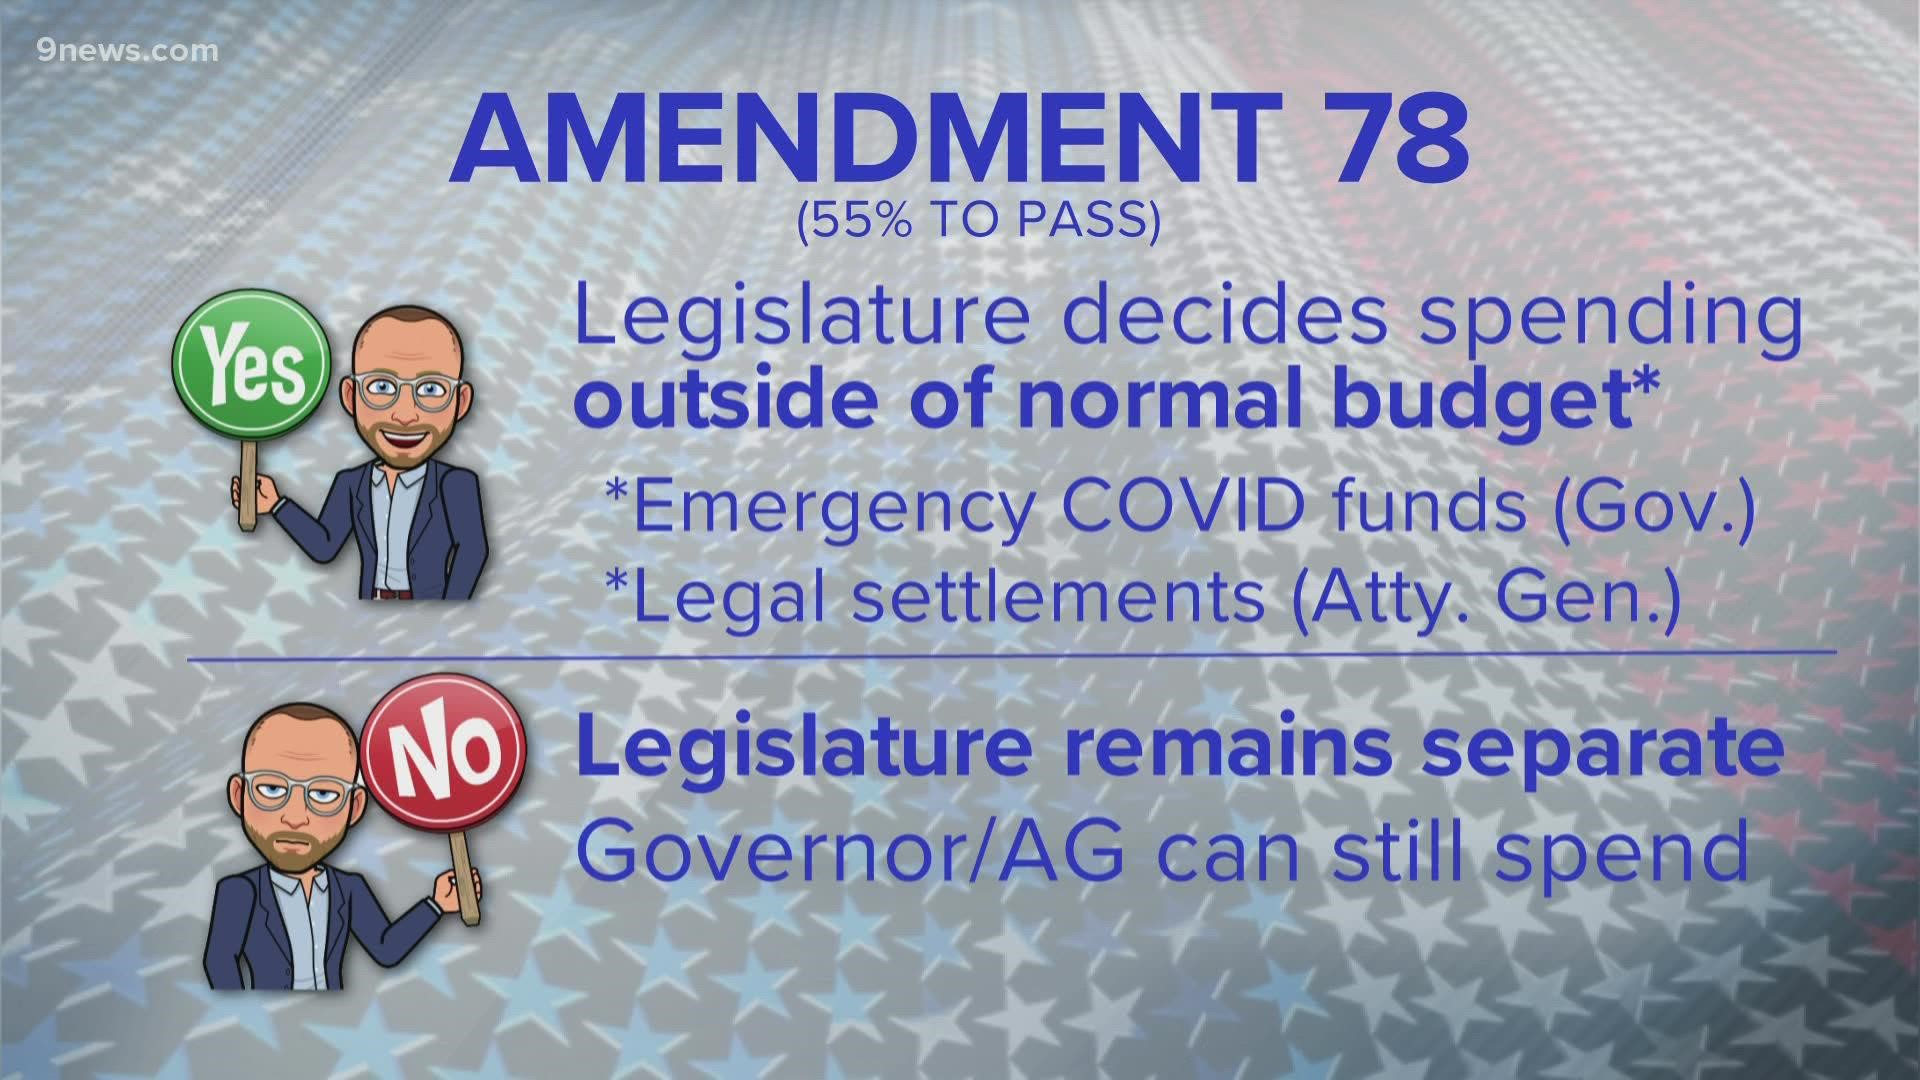 To understand what Amendment 78 wants you to change about how state money is spent, you first need to know how Colorado spends money.